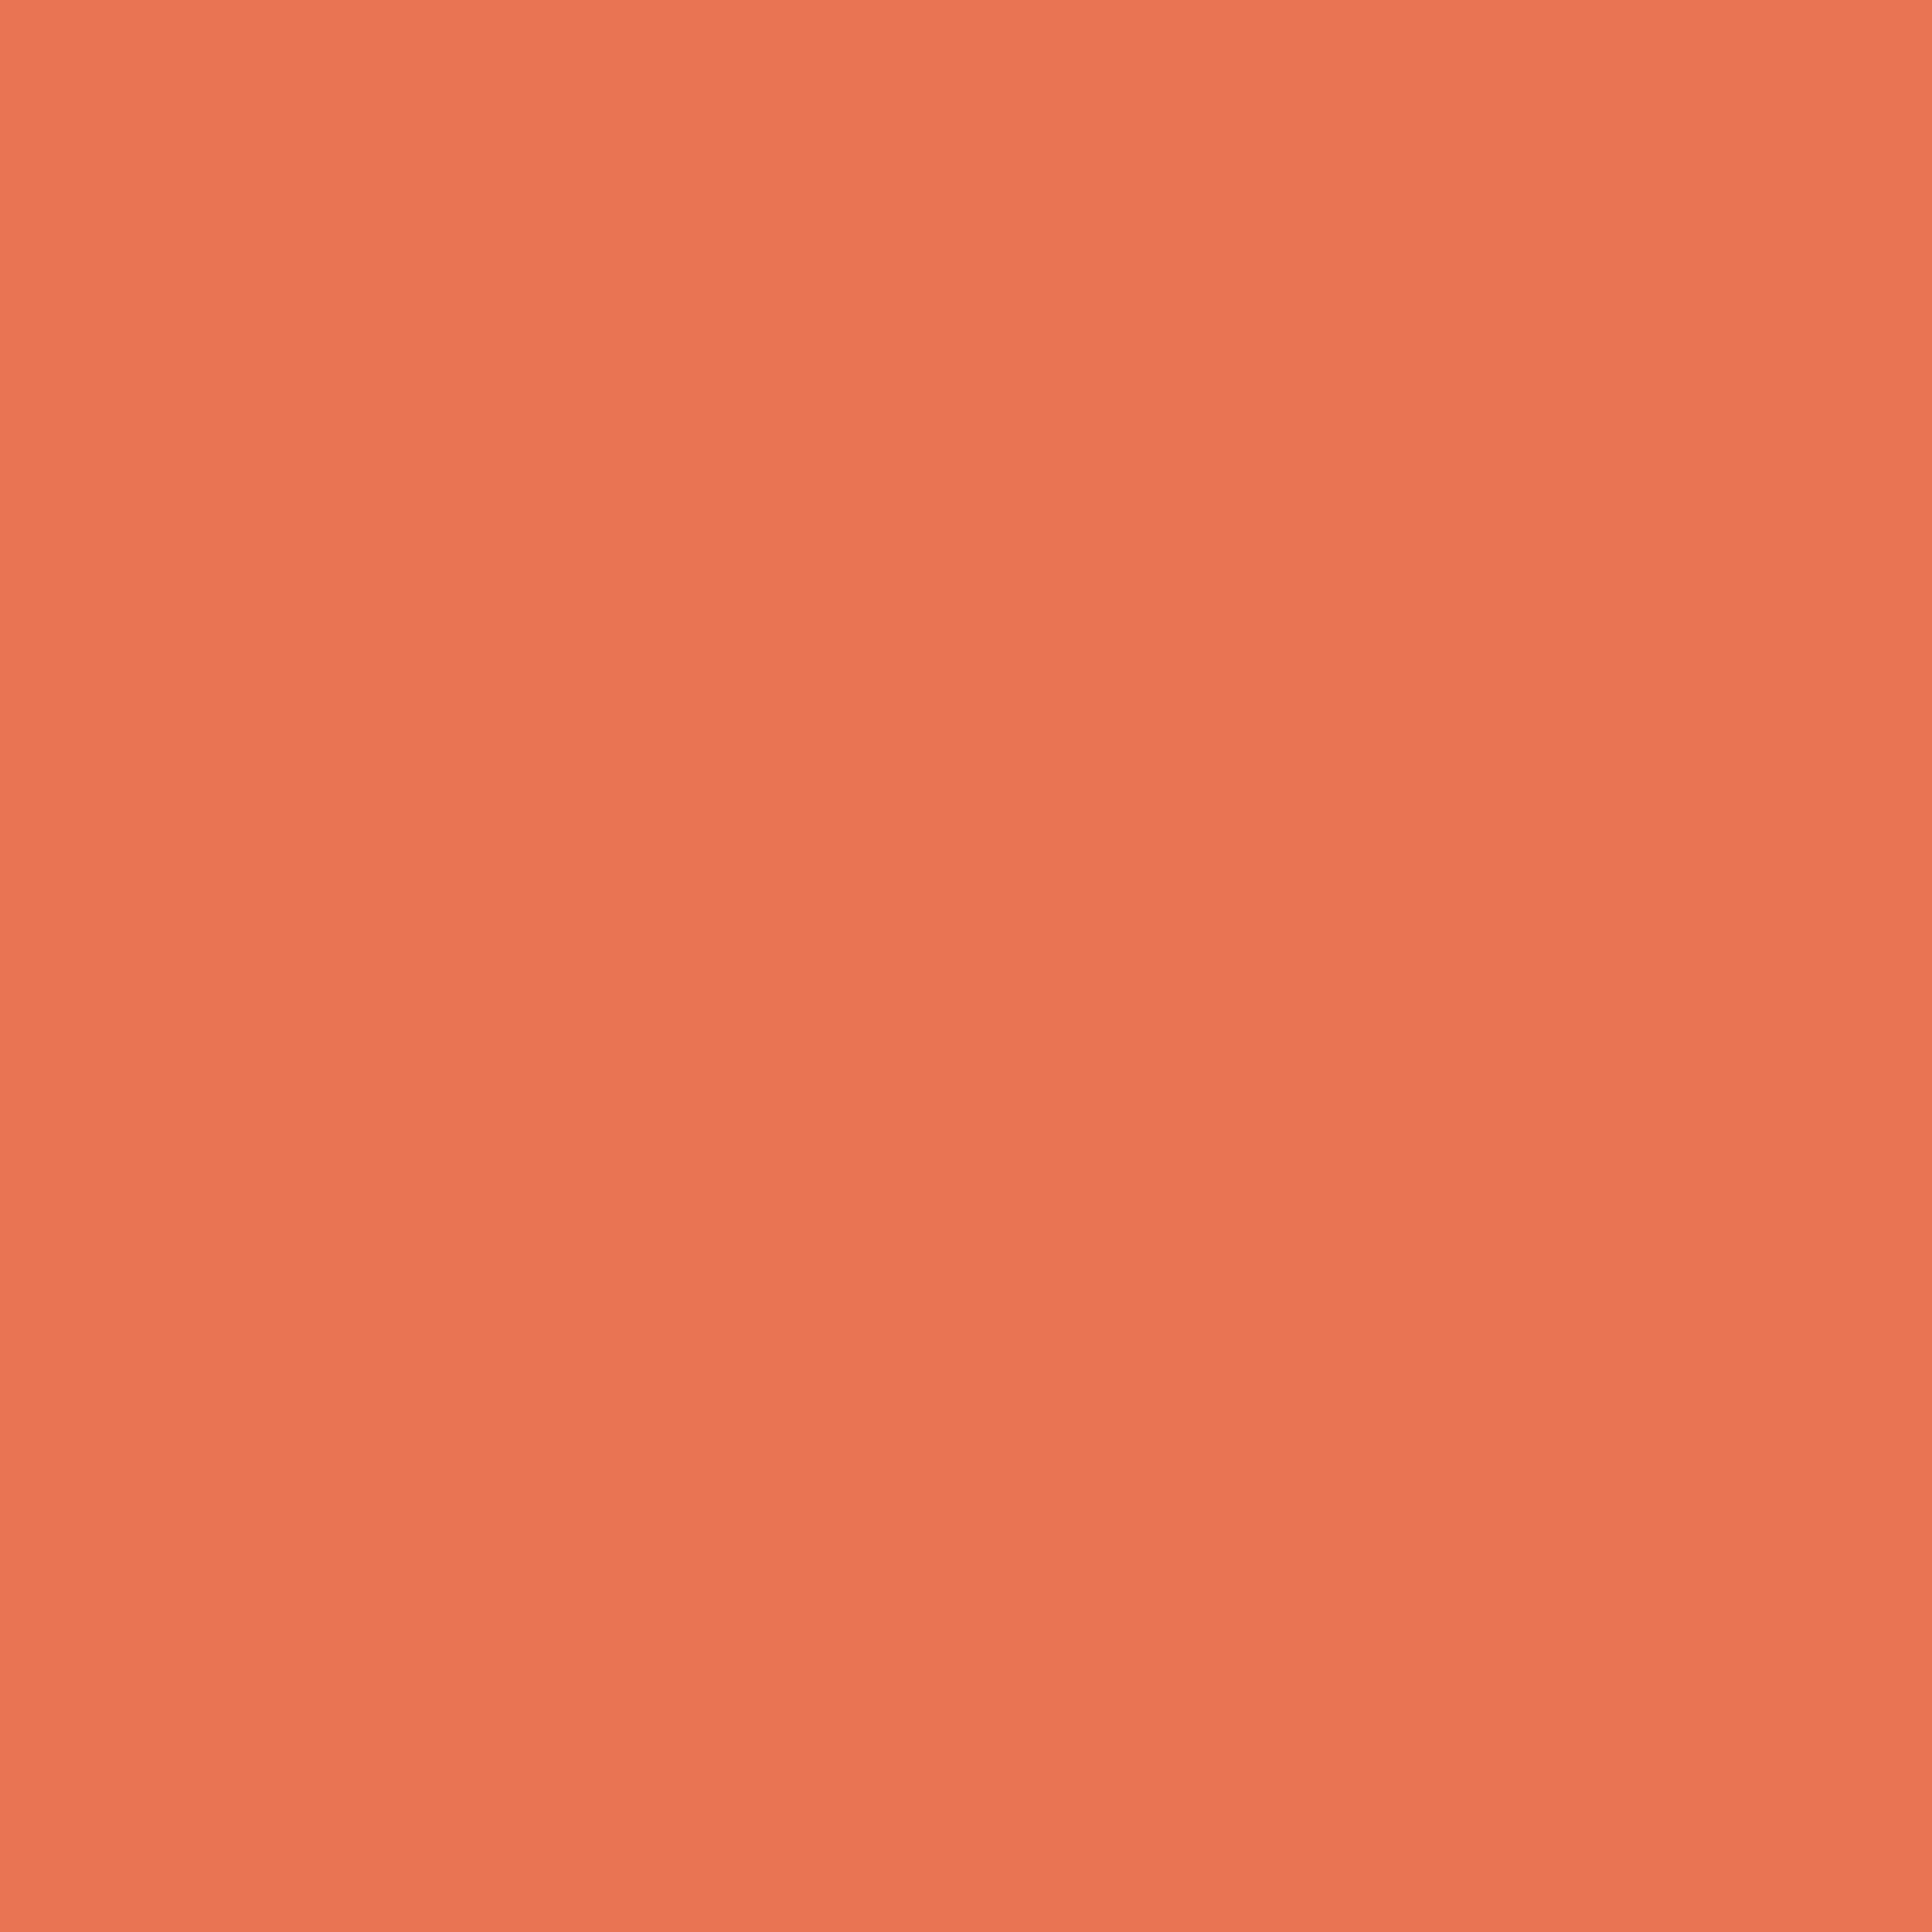 2732x2732 Light Red Ochre Solid Color Background